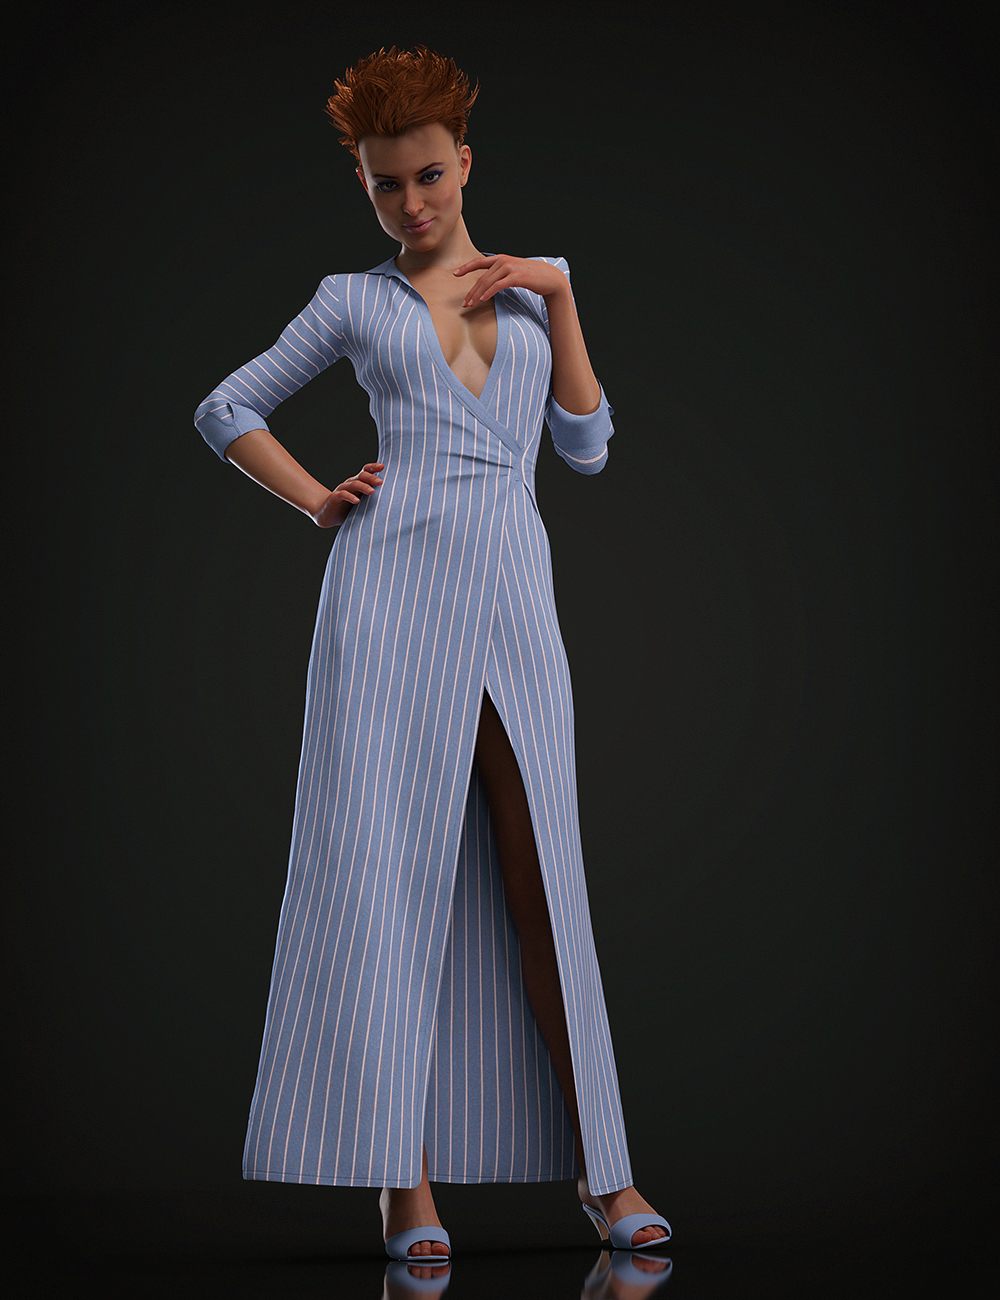 dForce Tres Chic Outfit for Genesis 8 and 8.1 Females